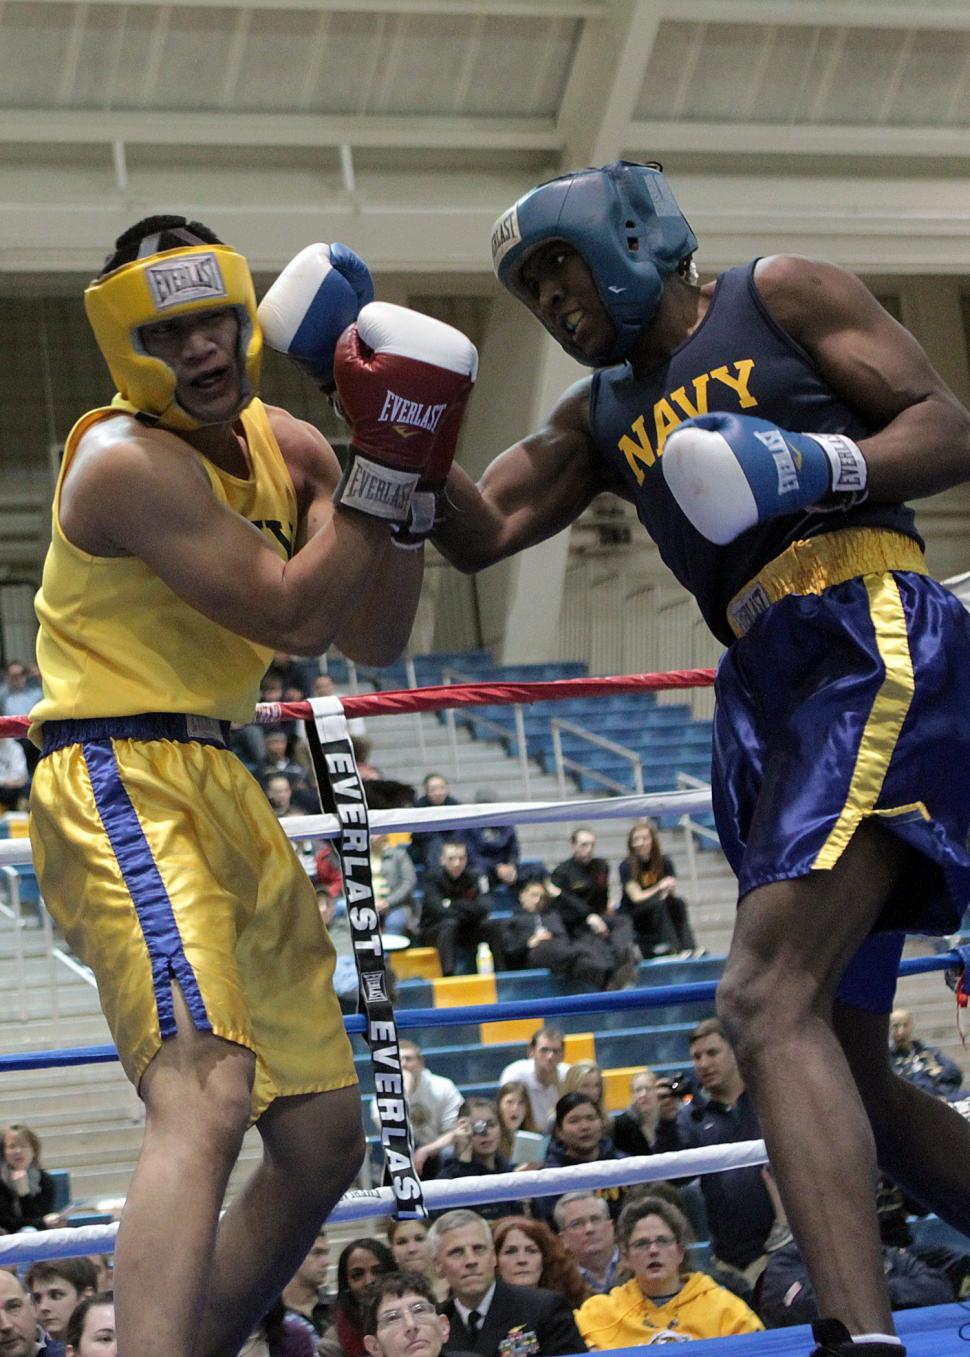 Free Image of Two Men Standing in Boxing Ring 